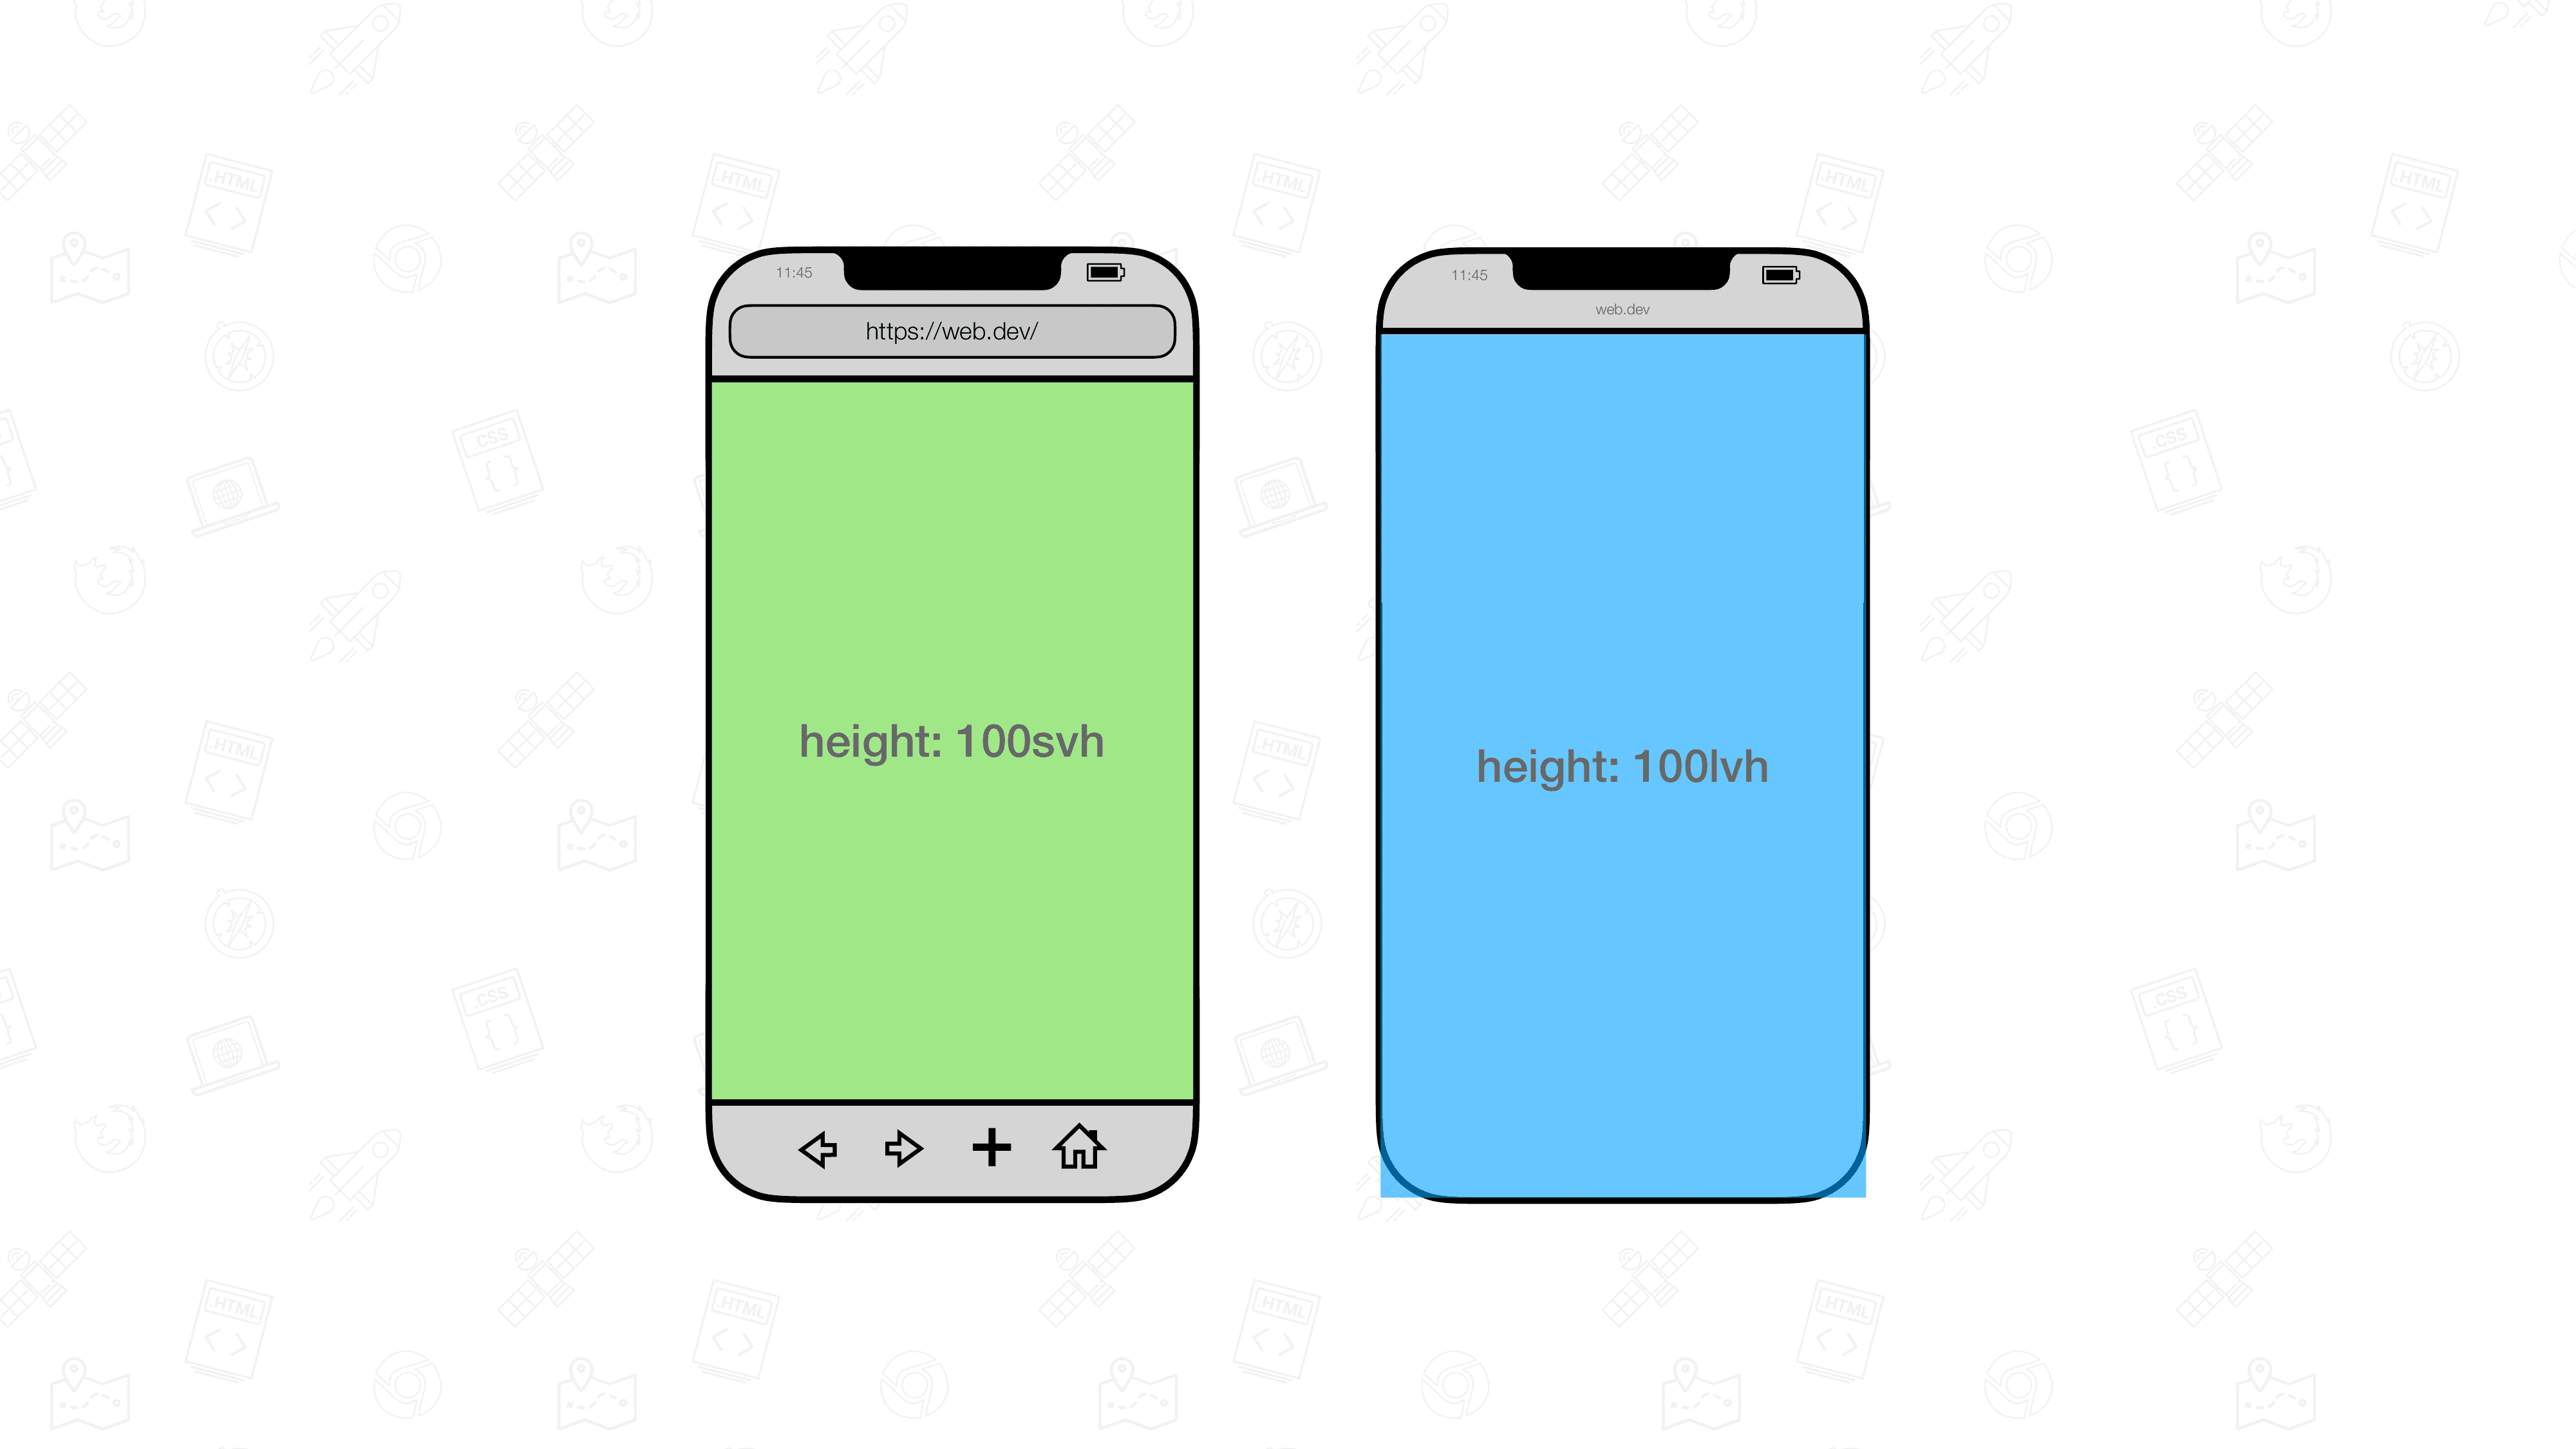 Two mobile browser visualizations positioned next to each other. One has an element sized to be 100svh and the other 100lvh.